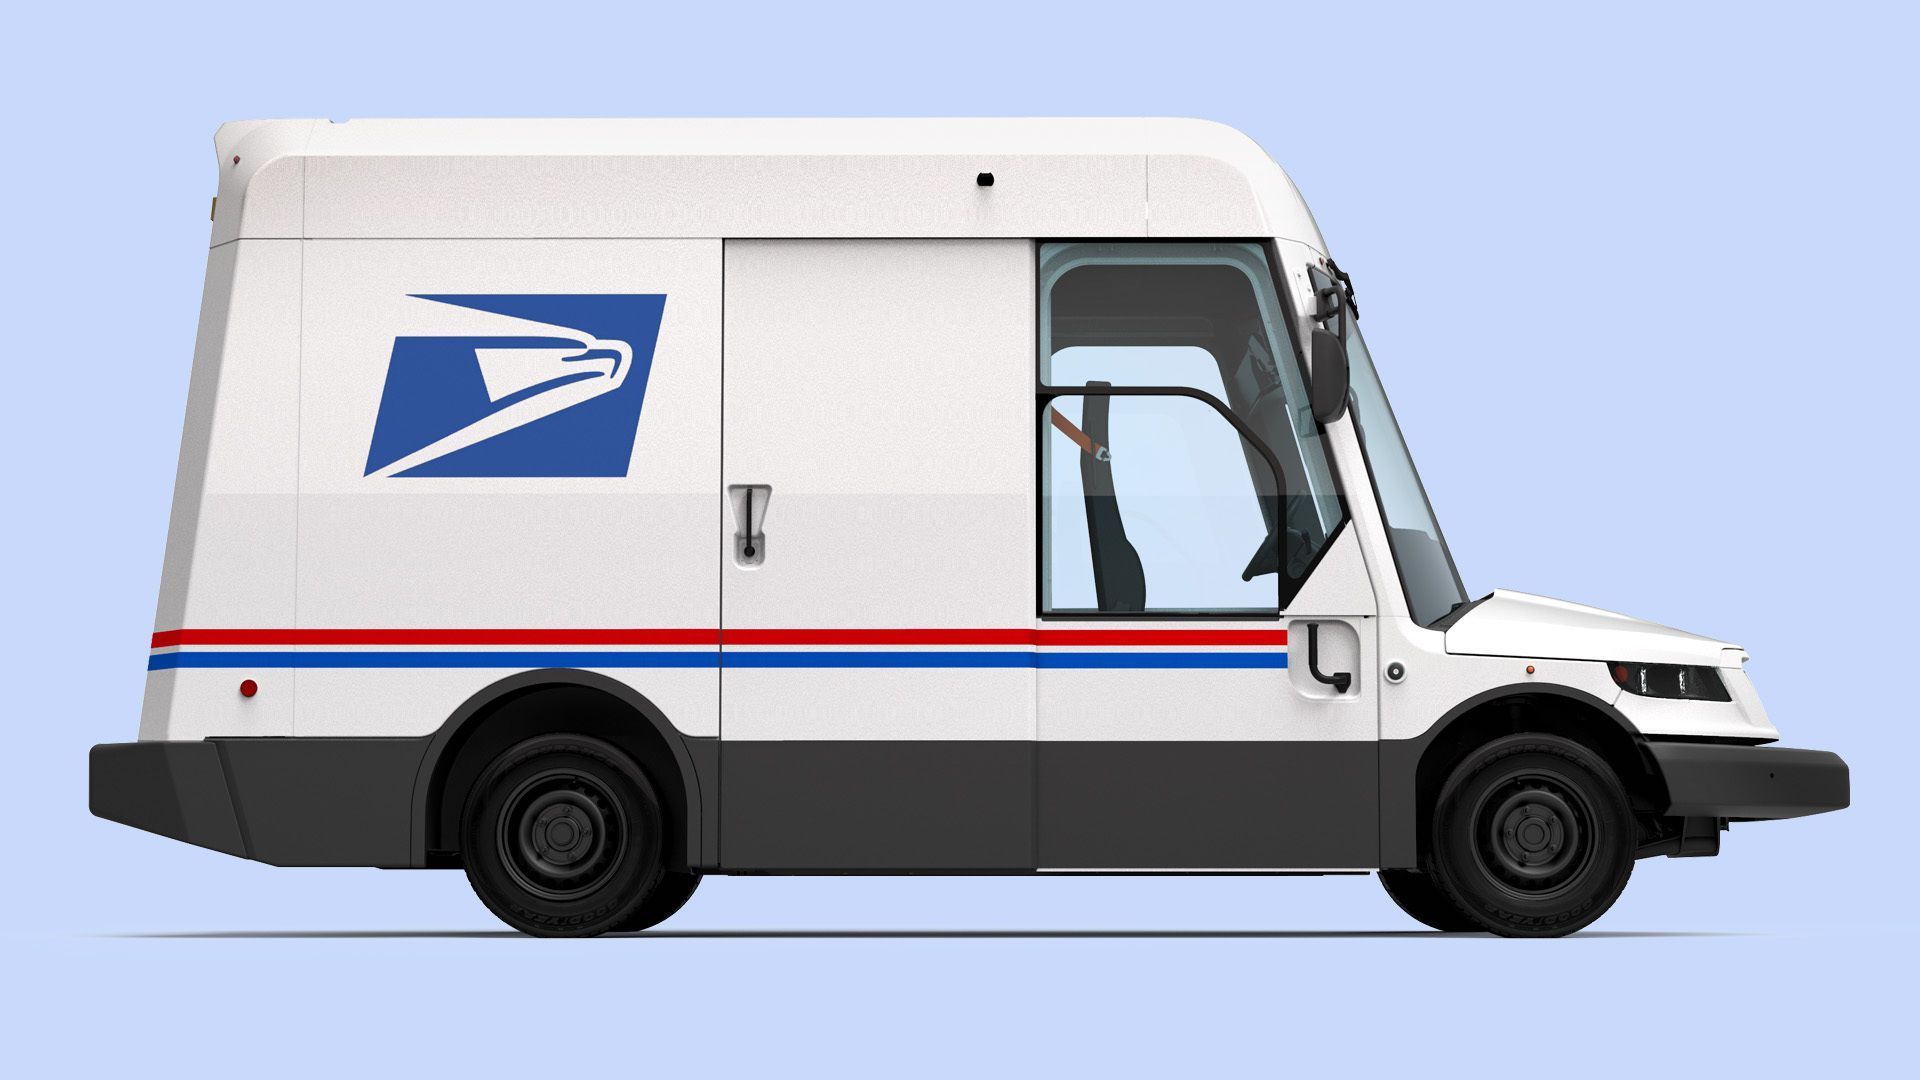 Image of the U.S. Postal Service's next delivery vehicle